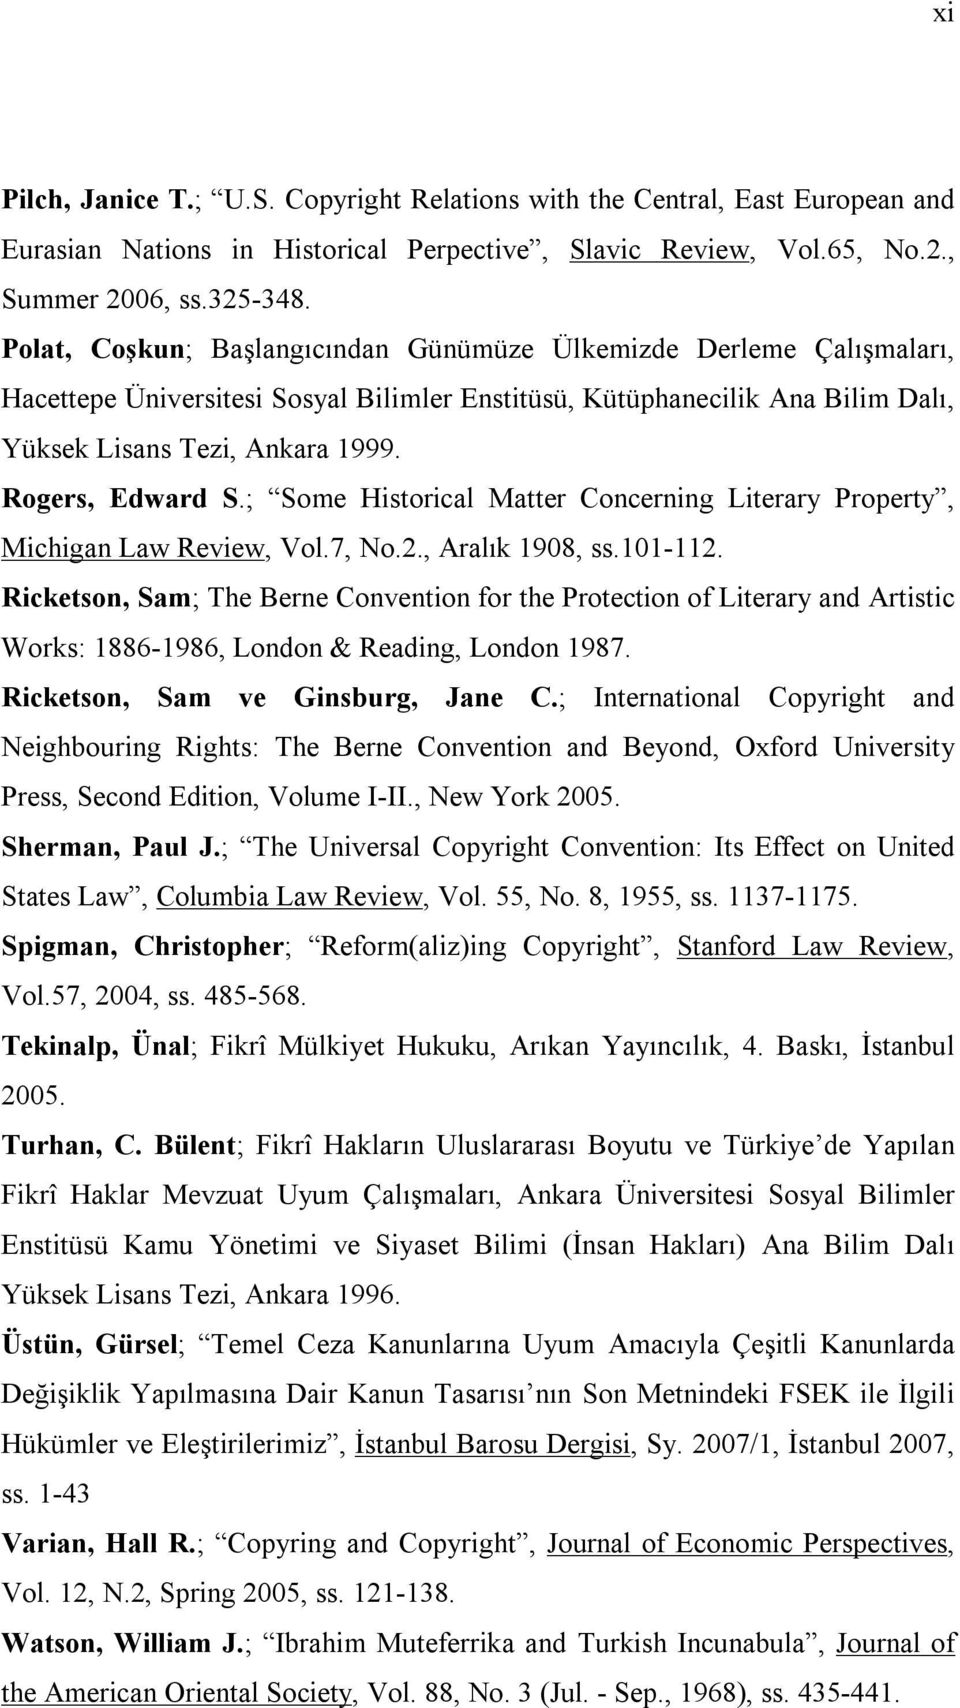 Rogers, Edward S.; Some Historical Matter Concerning Literary Property, Michigan Law Review, Vol.7, No.2., Aralık 1908, ss.101-112.